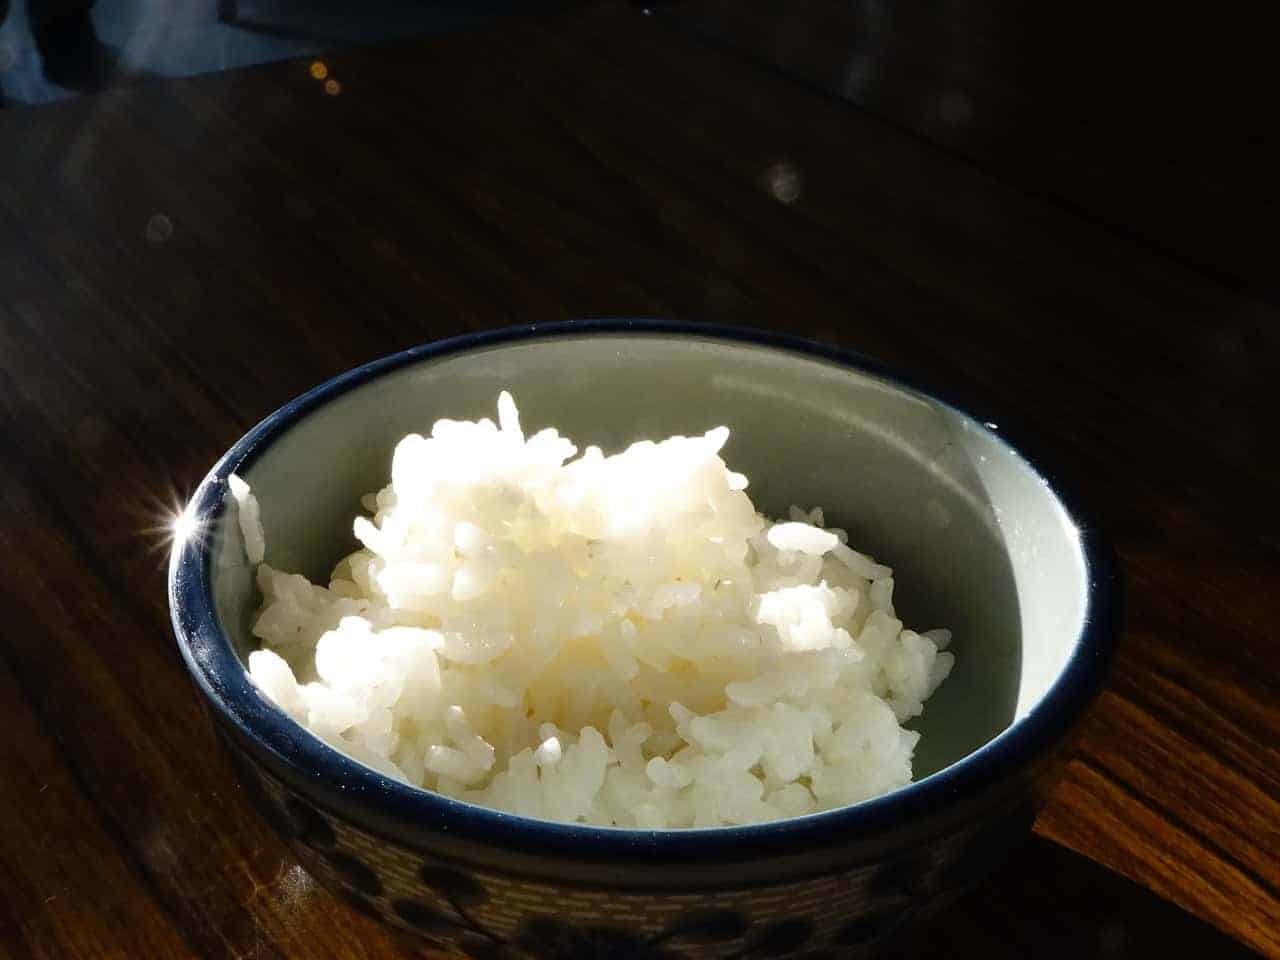 plain cooked rice